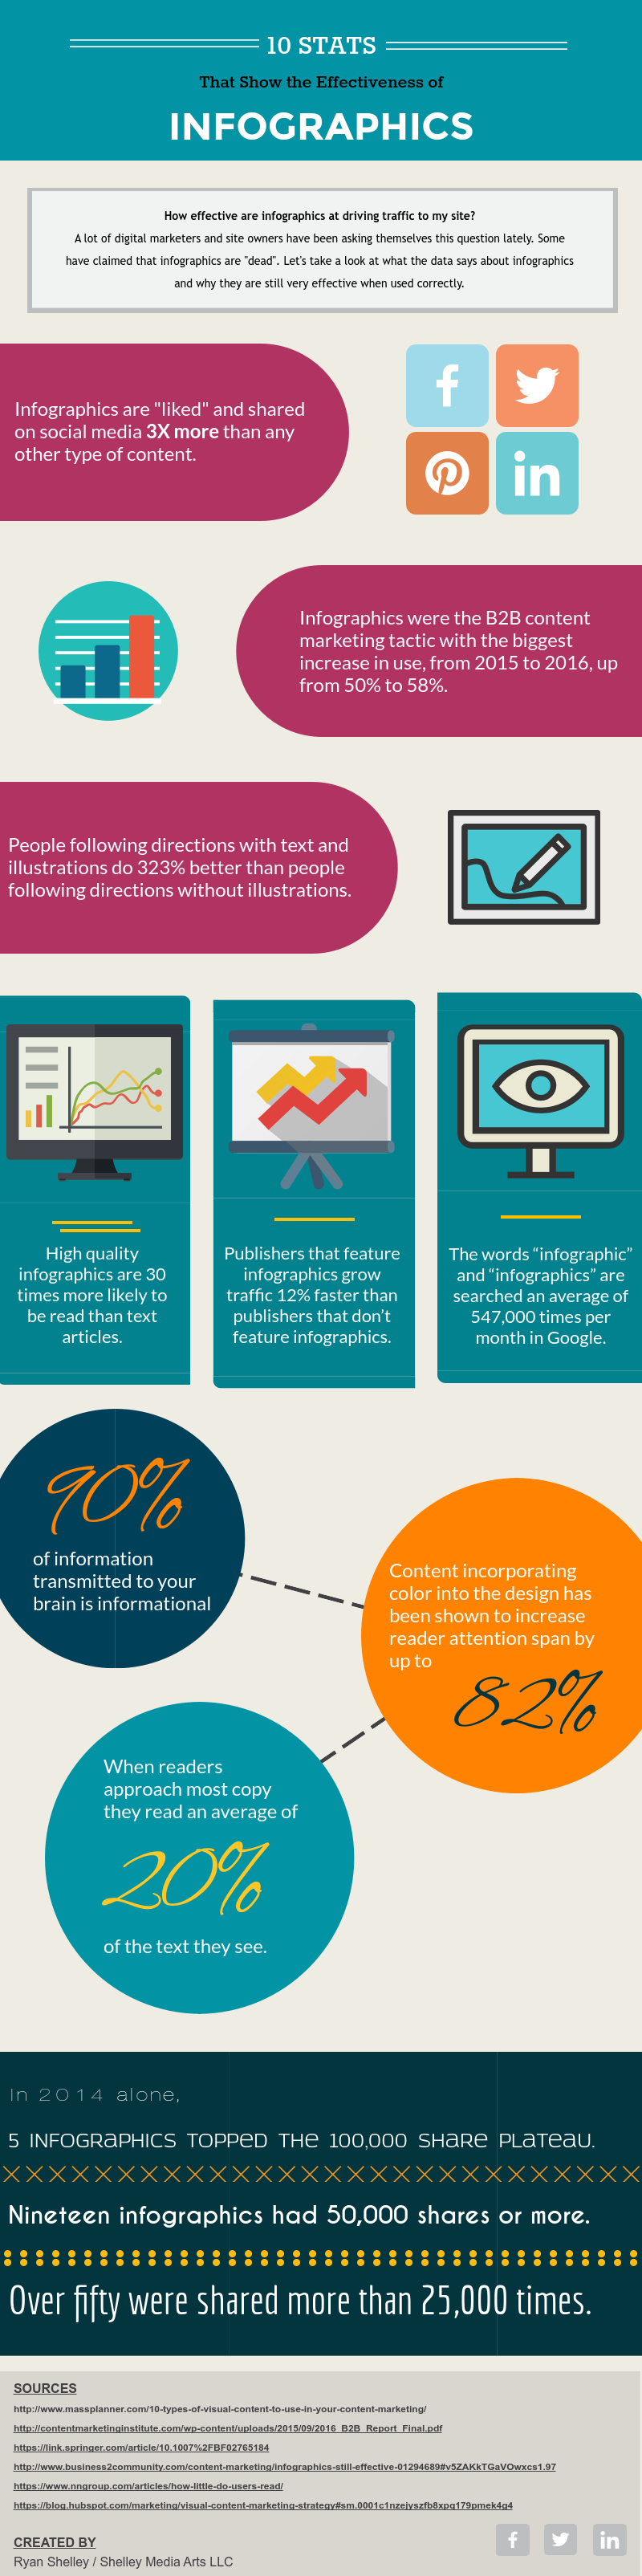 5 Amazing Facts about Corporate eLearning Infographic - e-Learning Infographics